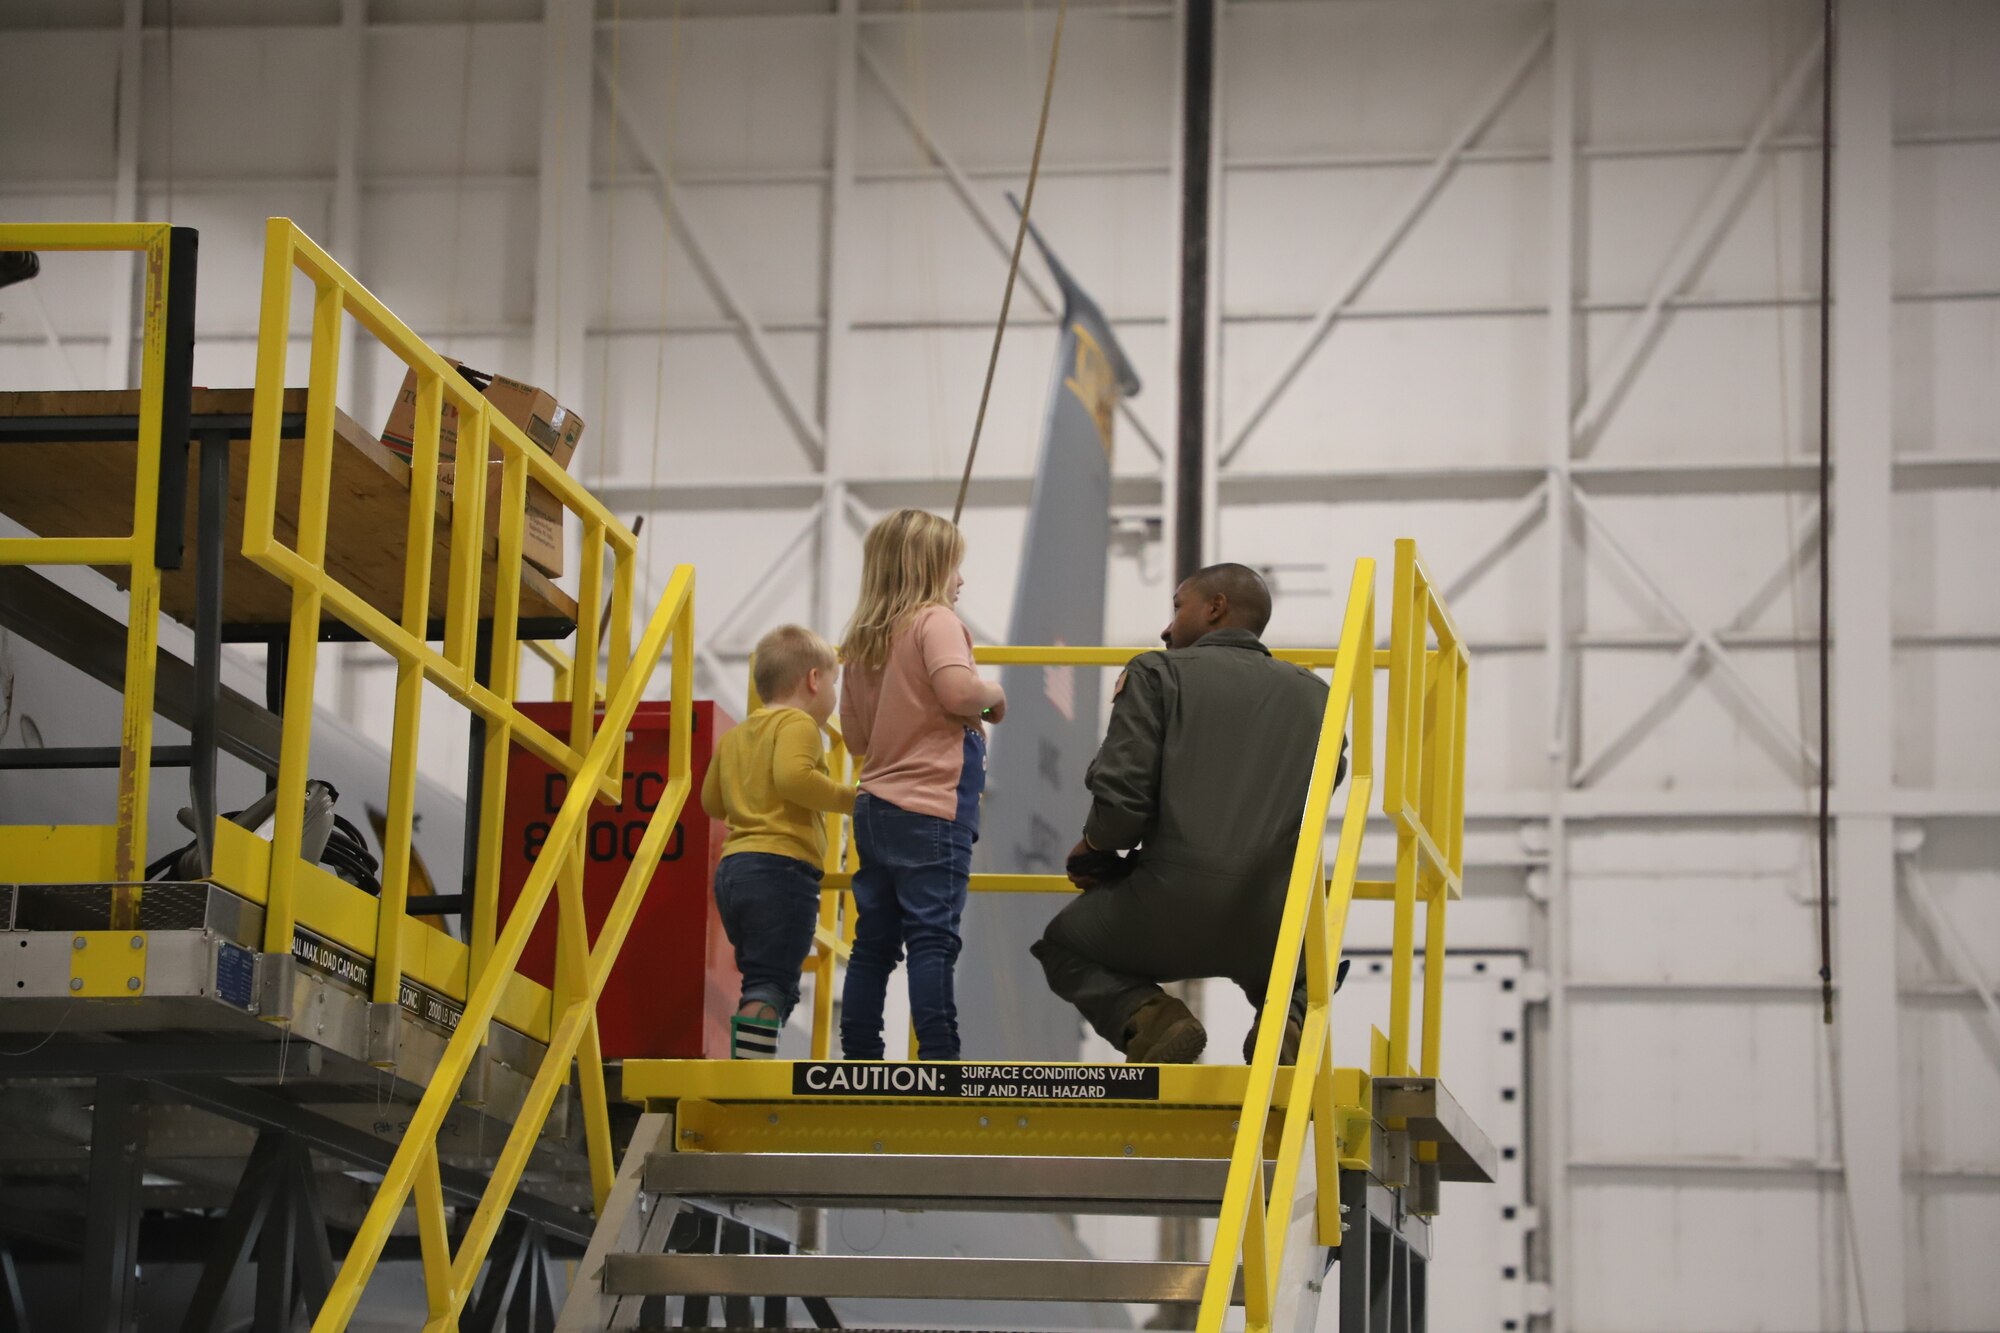 Tinley Benyshek, Pilot for the Day, and her brother, Trip, talk with Major Sterling Scales about the KC-135 at the 190th Air Refueling Wing in Topeka, KS, October 24, 2022. Tinley is the first Pilot for a Day participant at the 190th ARW.